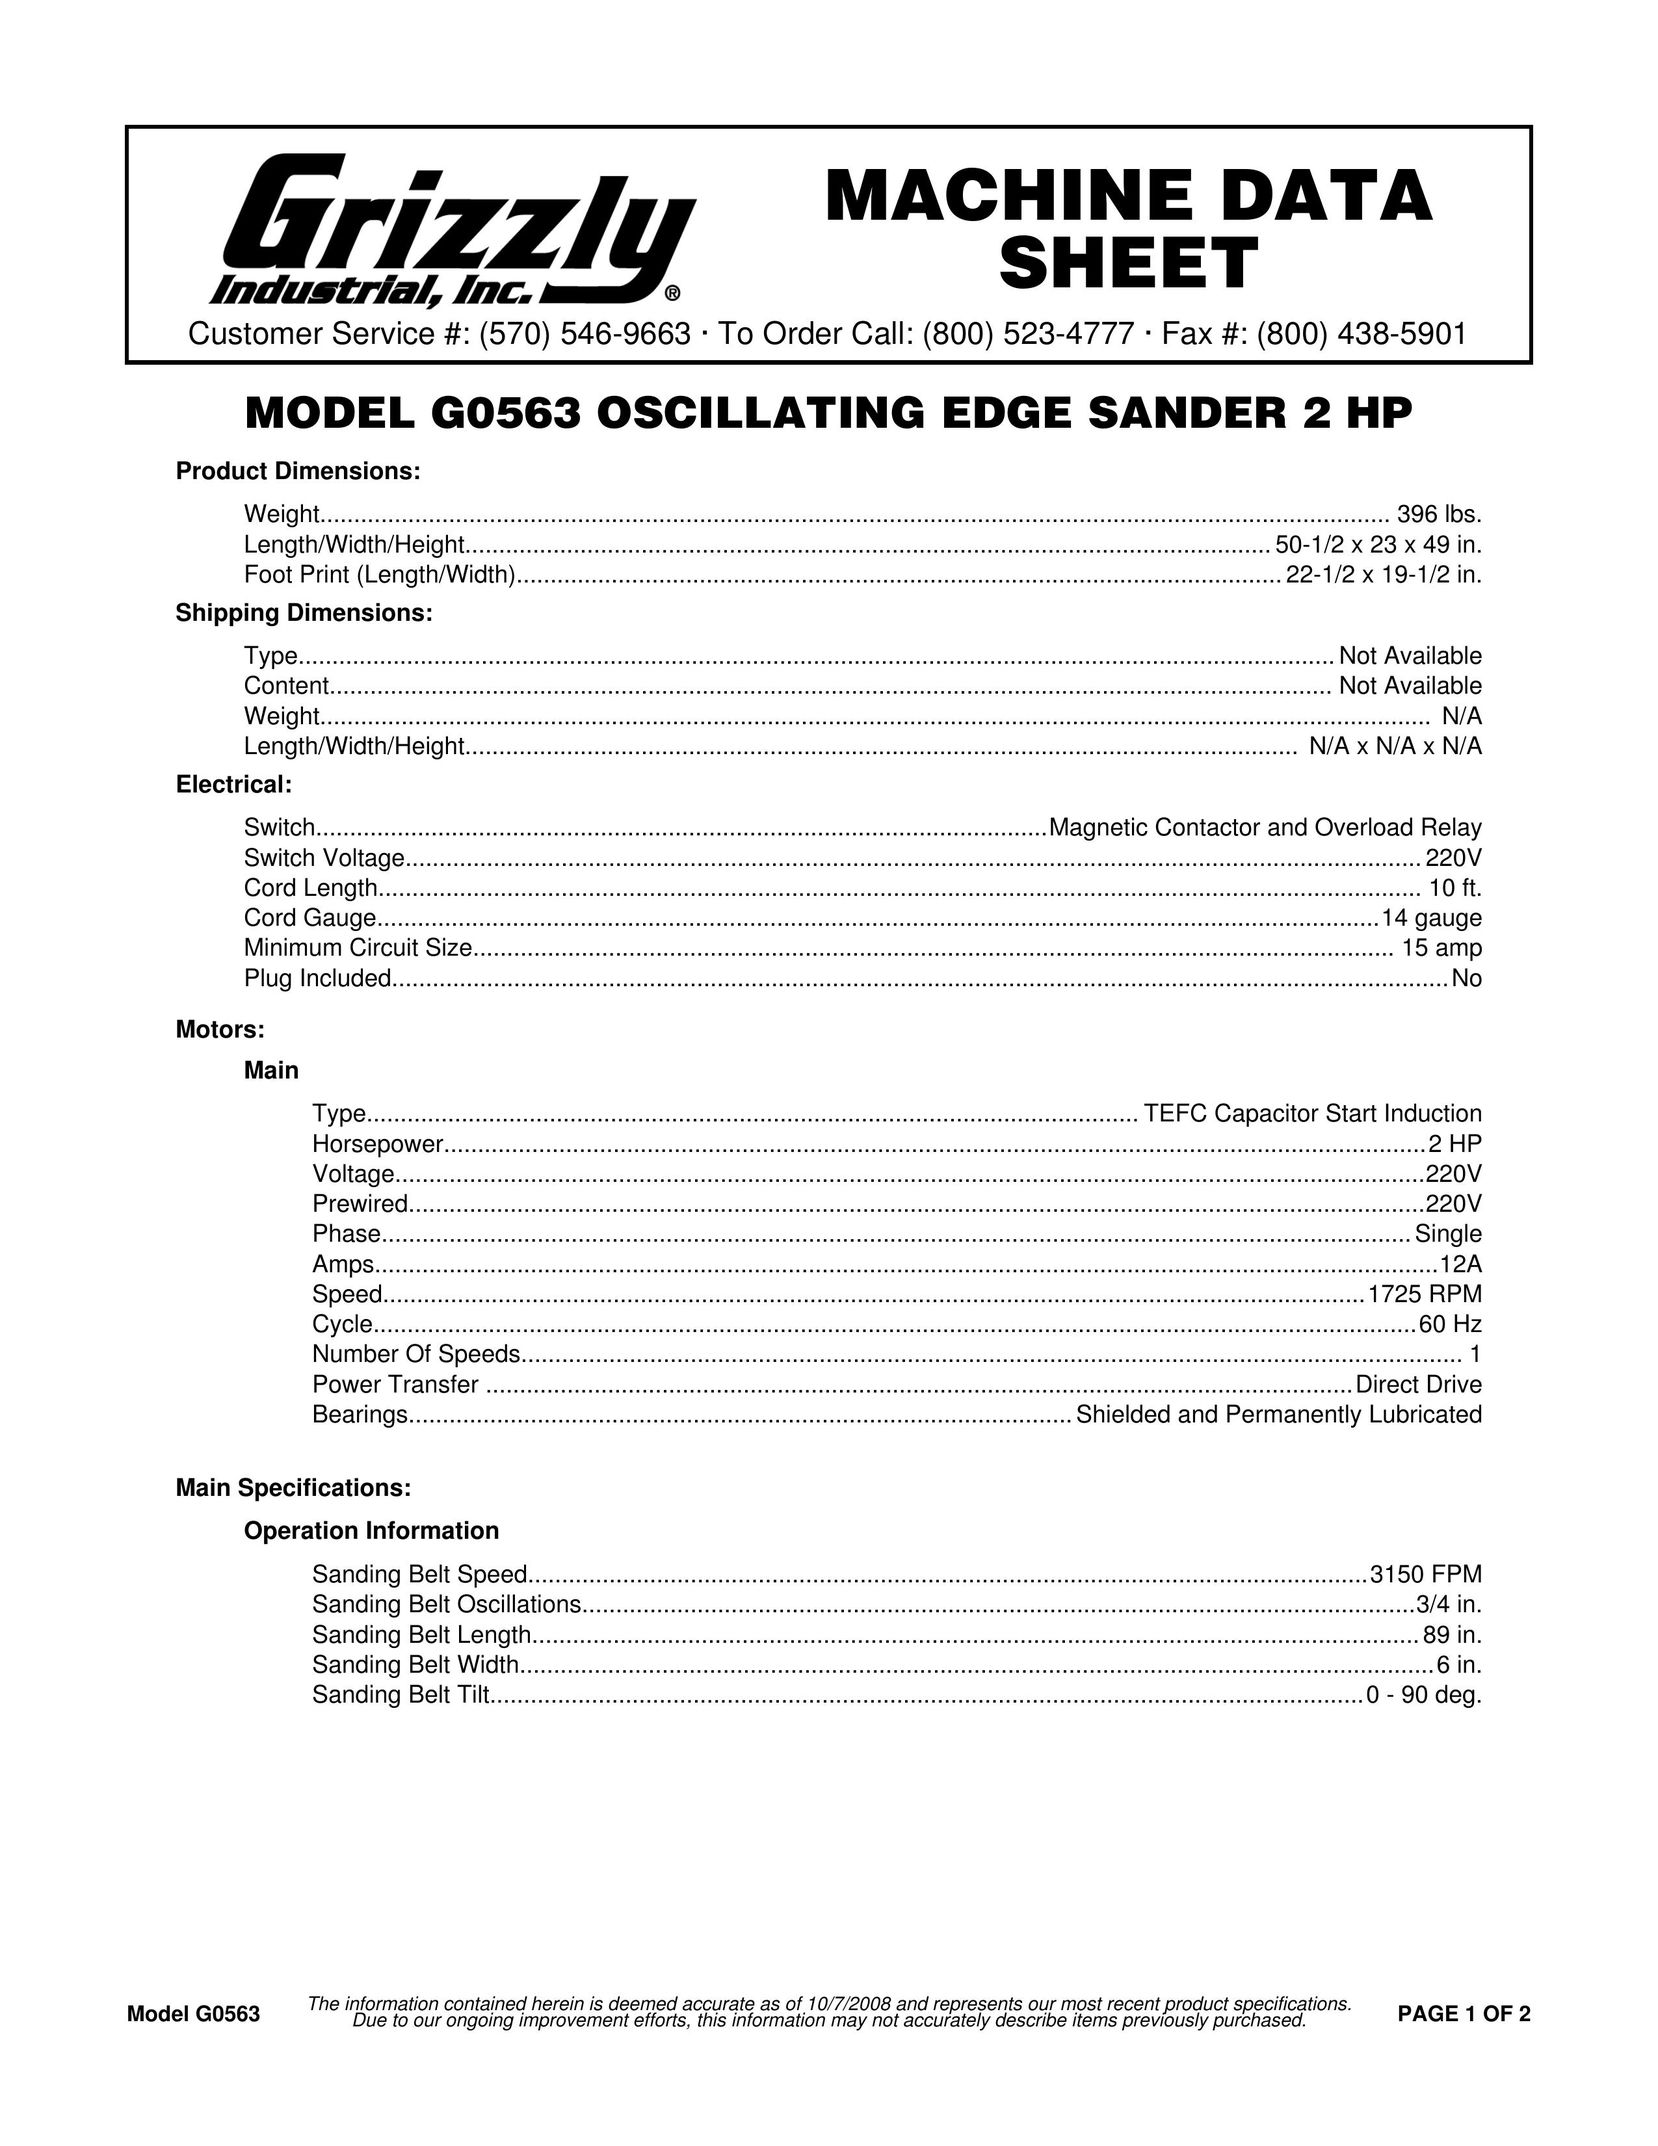 Grizzly G0563 Sander User Manual